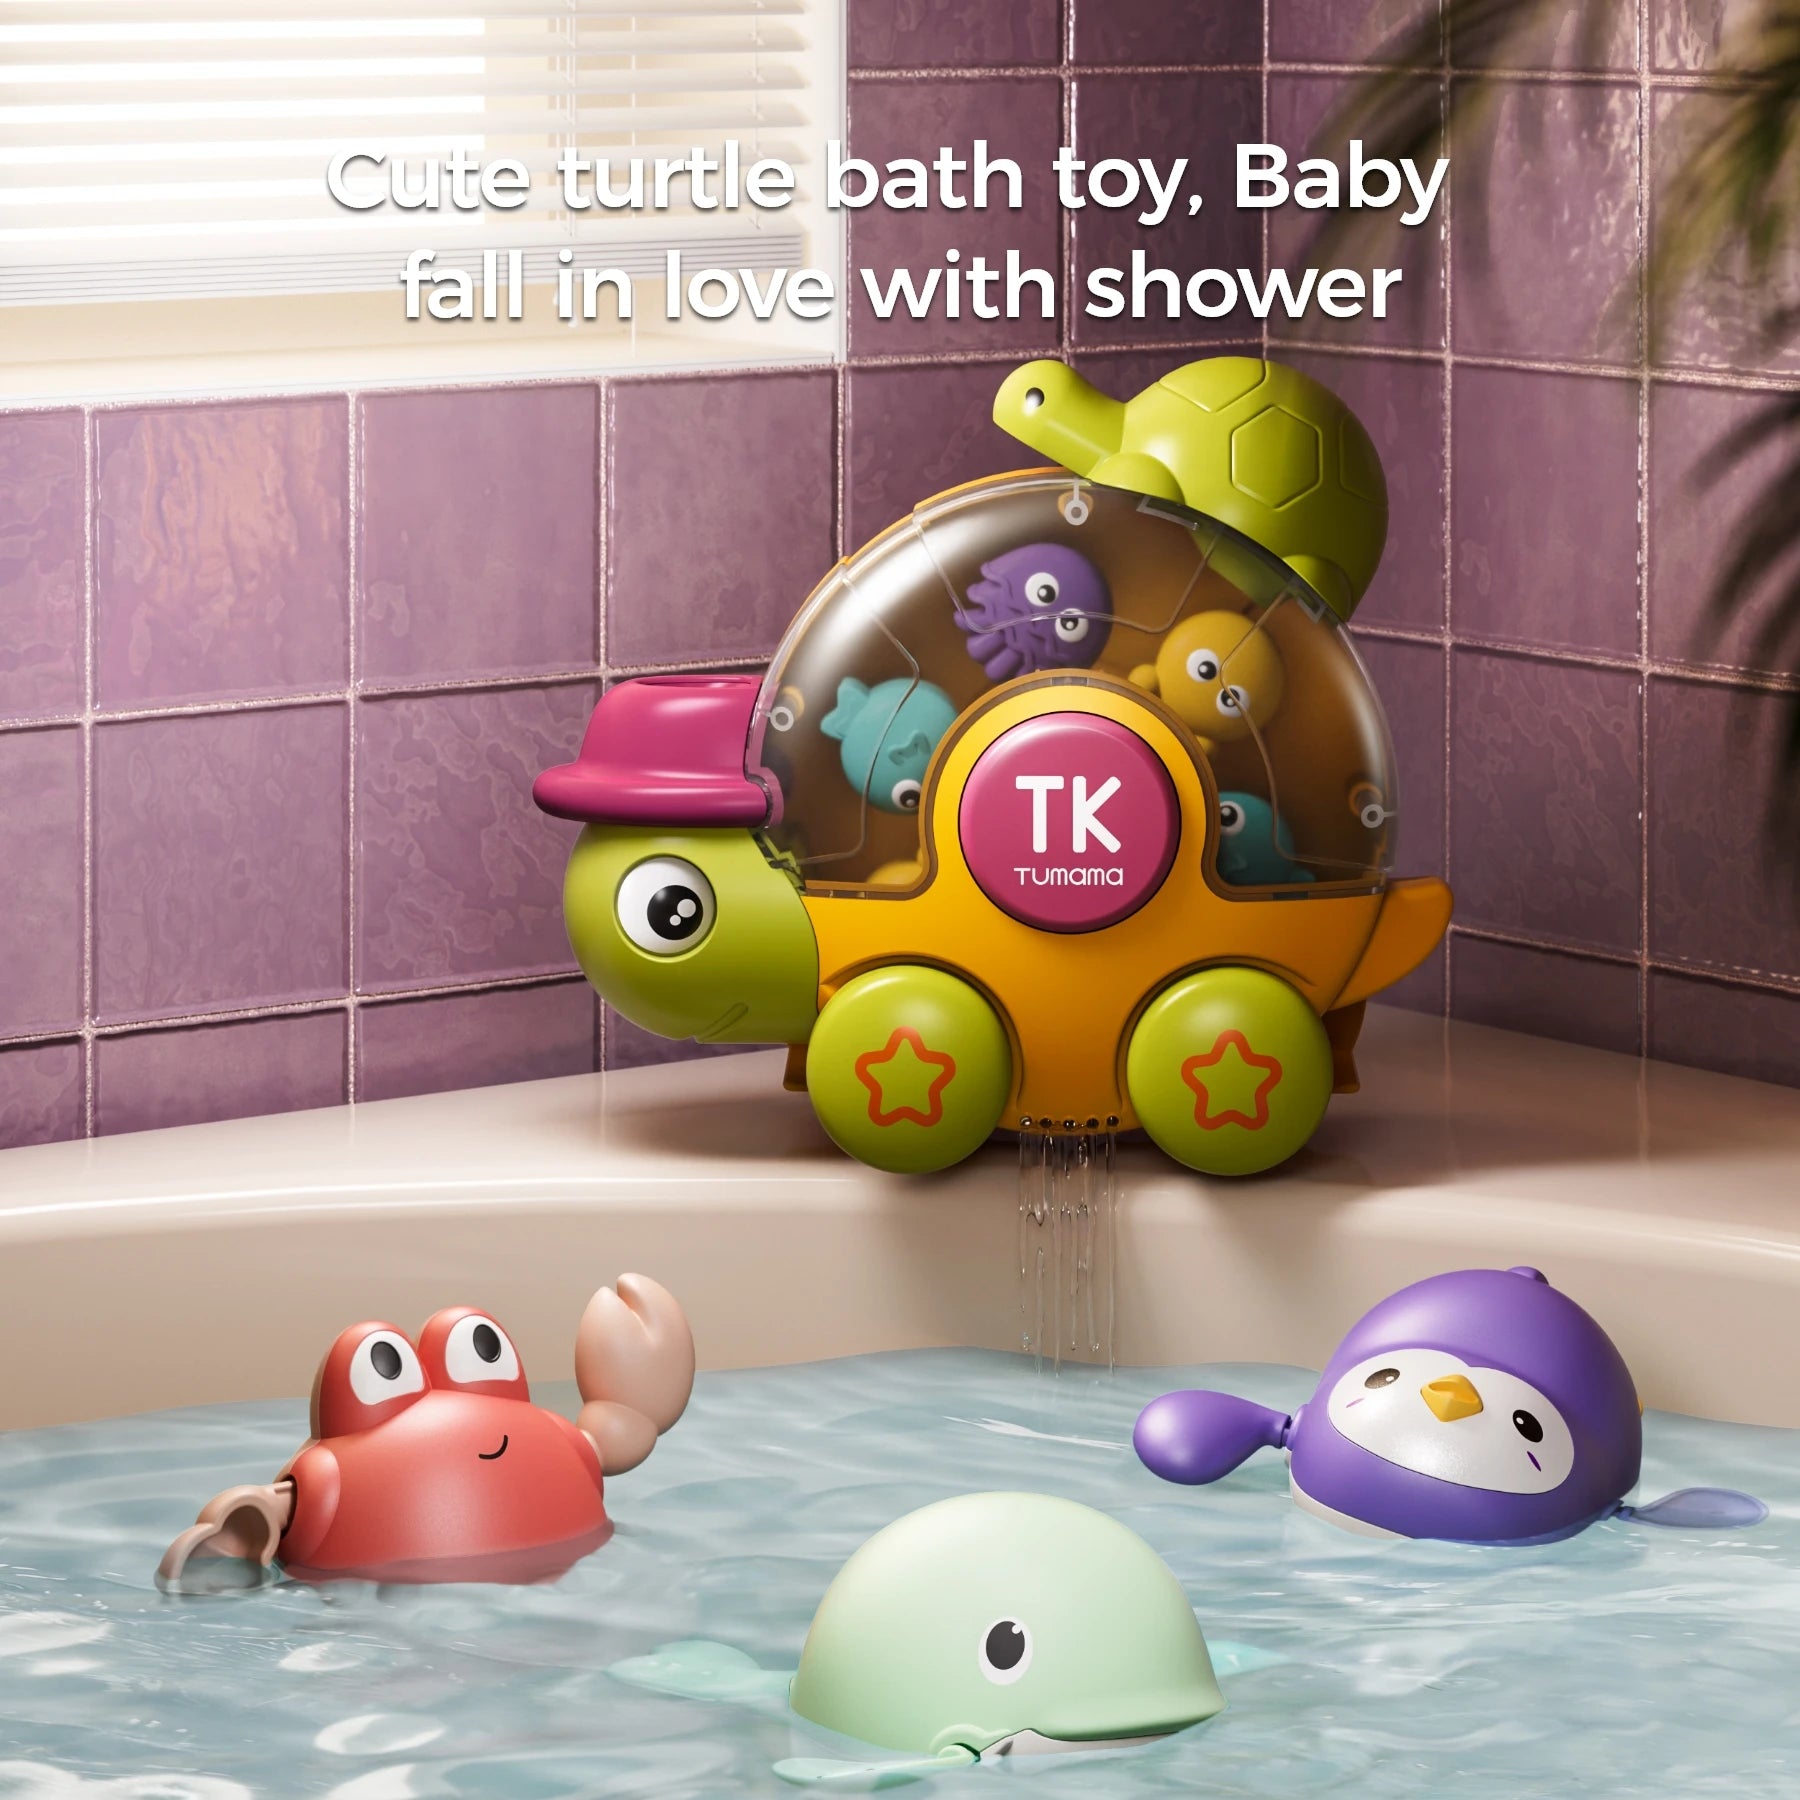 Wind-up feature in bath toy for toddler bath enjoyment